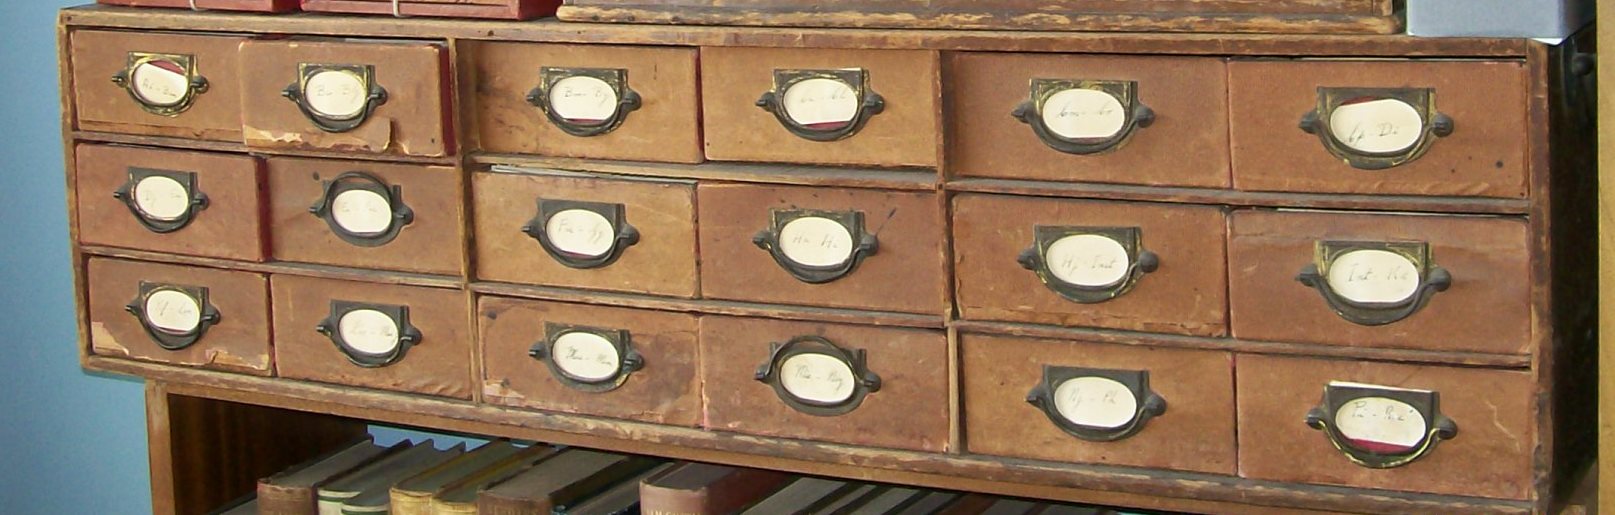 Part of Alfred Marshall card catalogue